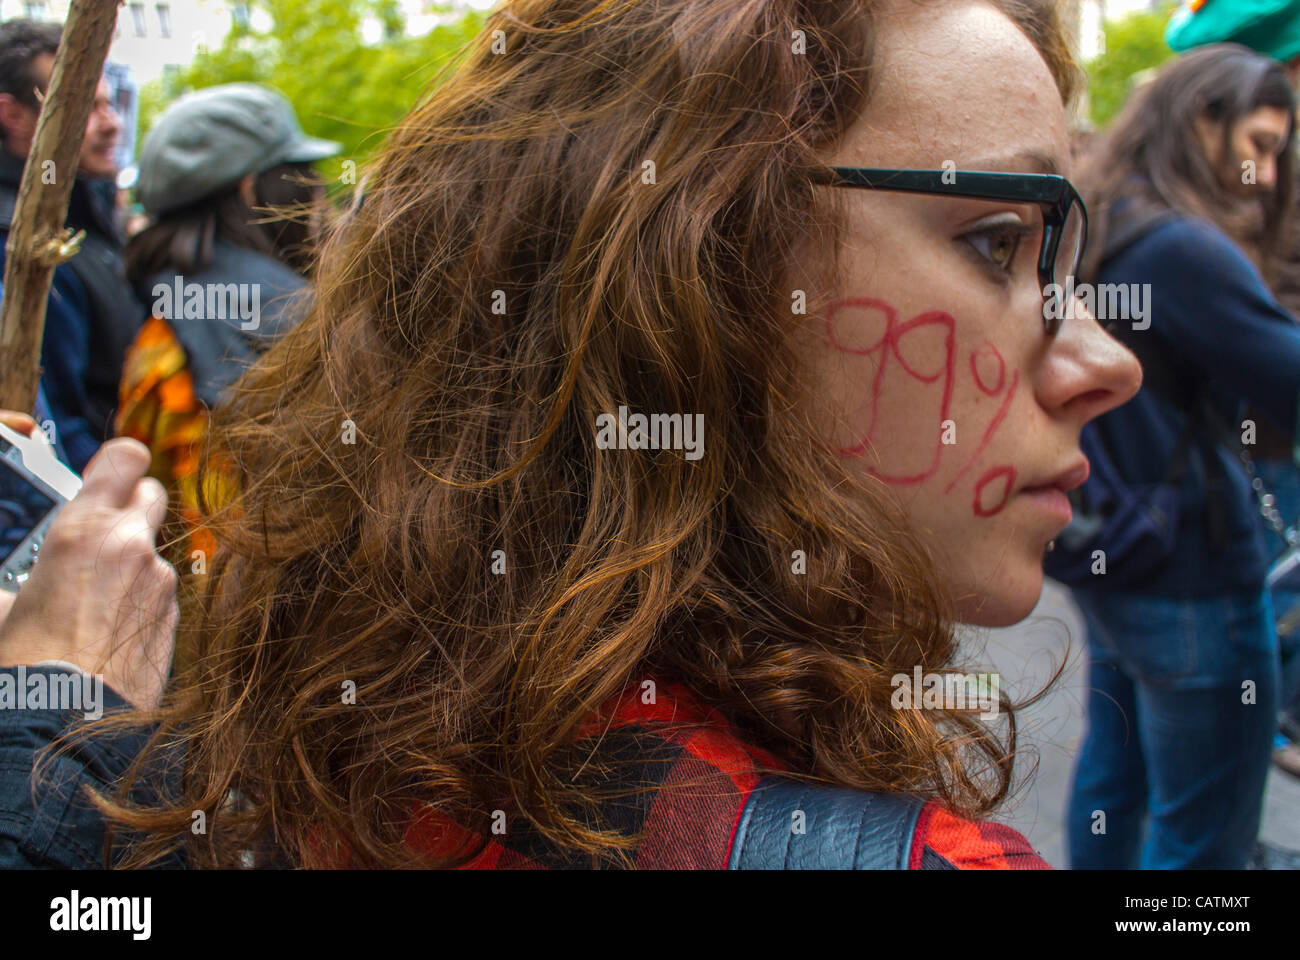 Paris, France, Close up, Girl's Face, at 'Indignants' Demonstration , French Teenage Girl with 99% Written on Face, political participation youth Stock Photo